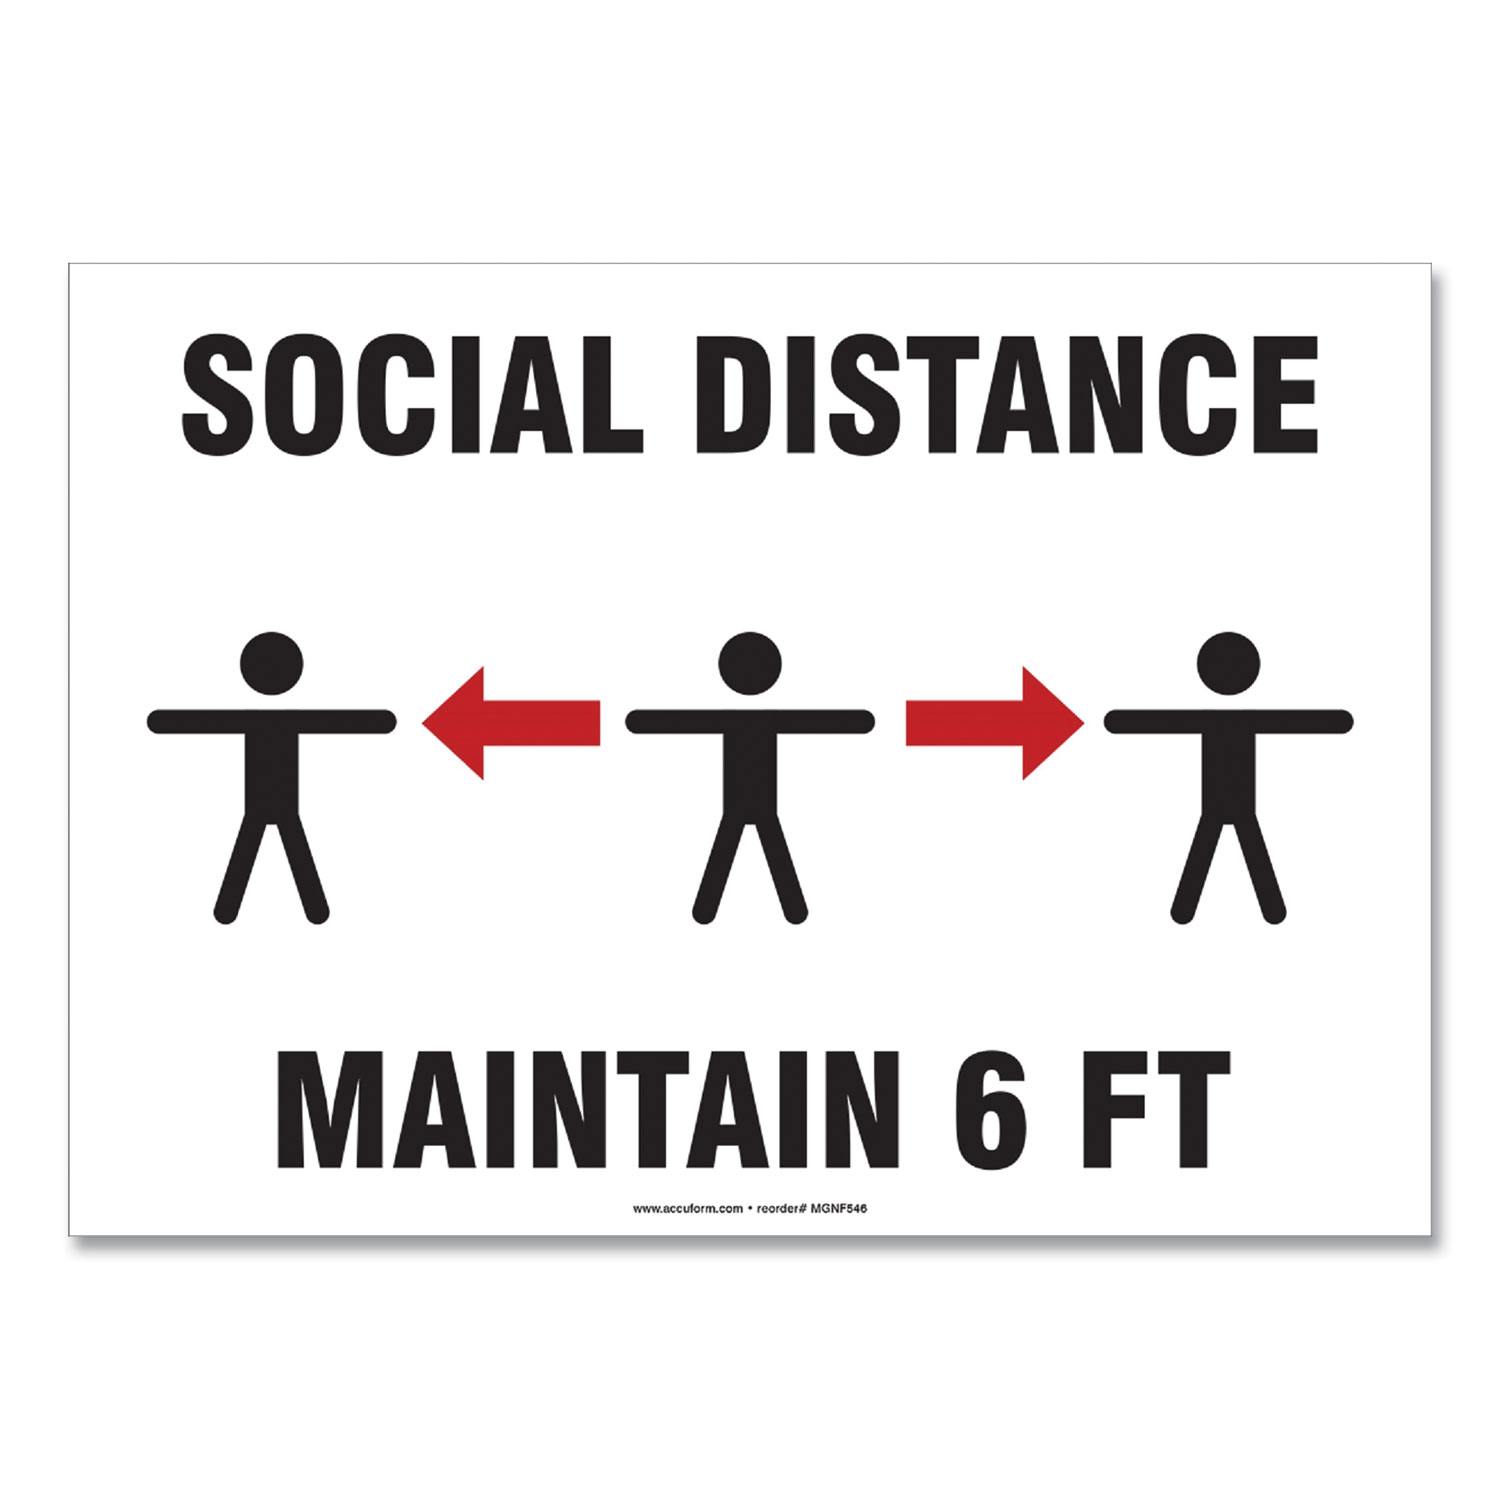  Accuform MGNF546VPESP Social Distance Signs, Wall, 14 x 10, Social Distance Maintain 6 ft, 3 Humans/Arrows, White, 10/Pack (GN1MGNF546VPESP) 